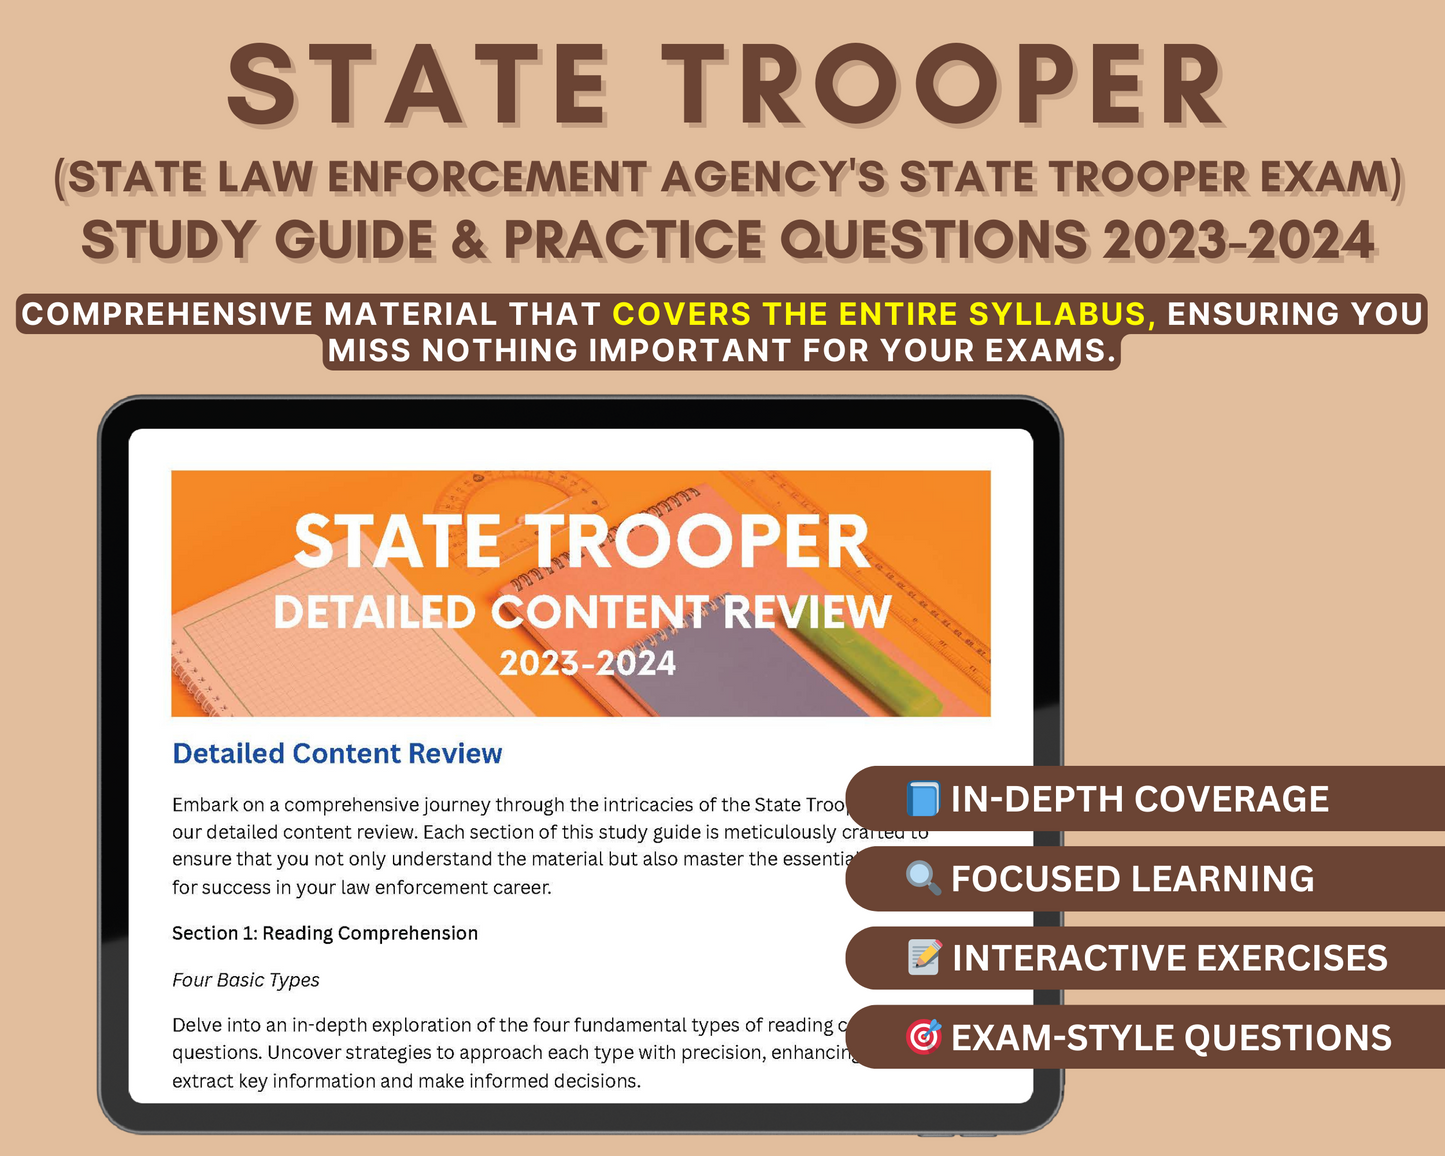 State Trooper Exam Study Guide 2023-24: In-Depth Content Review, Practice Tests & Exam Tips for Law Enforcement Mastery